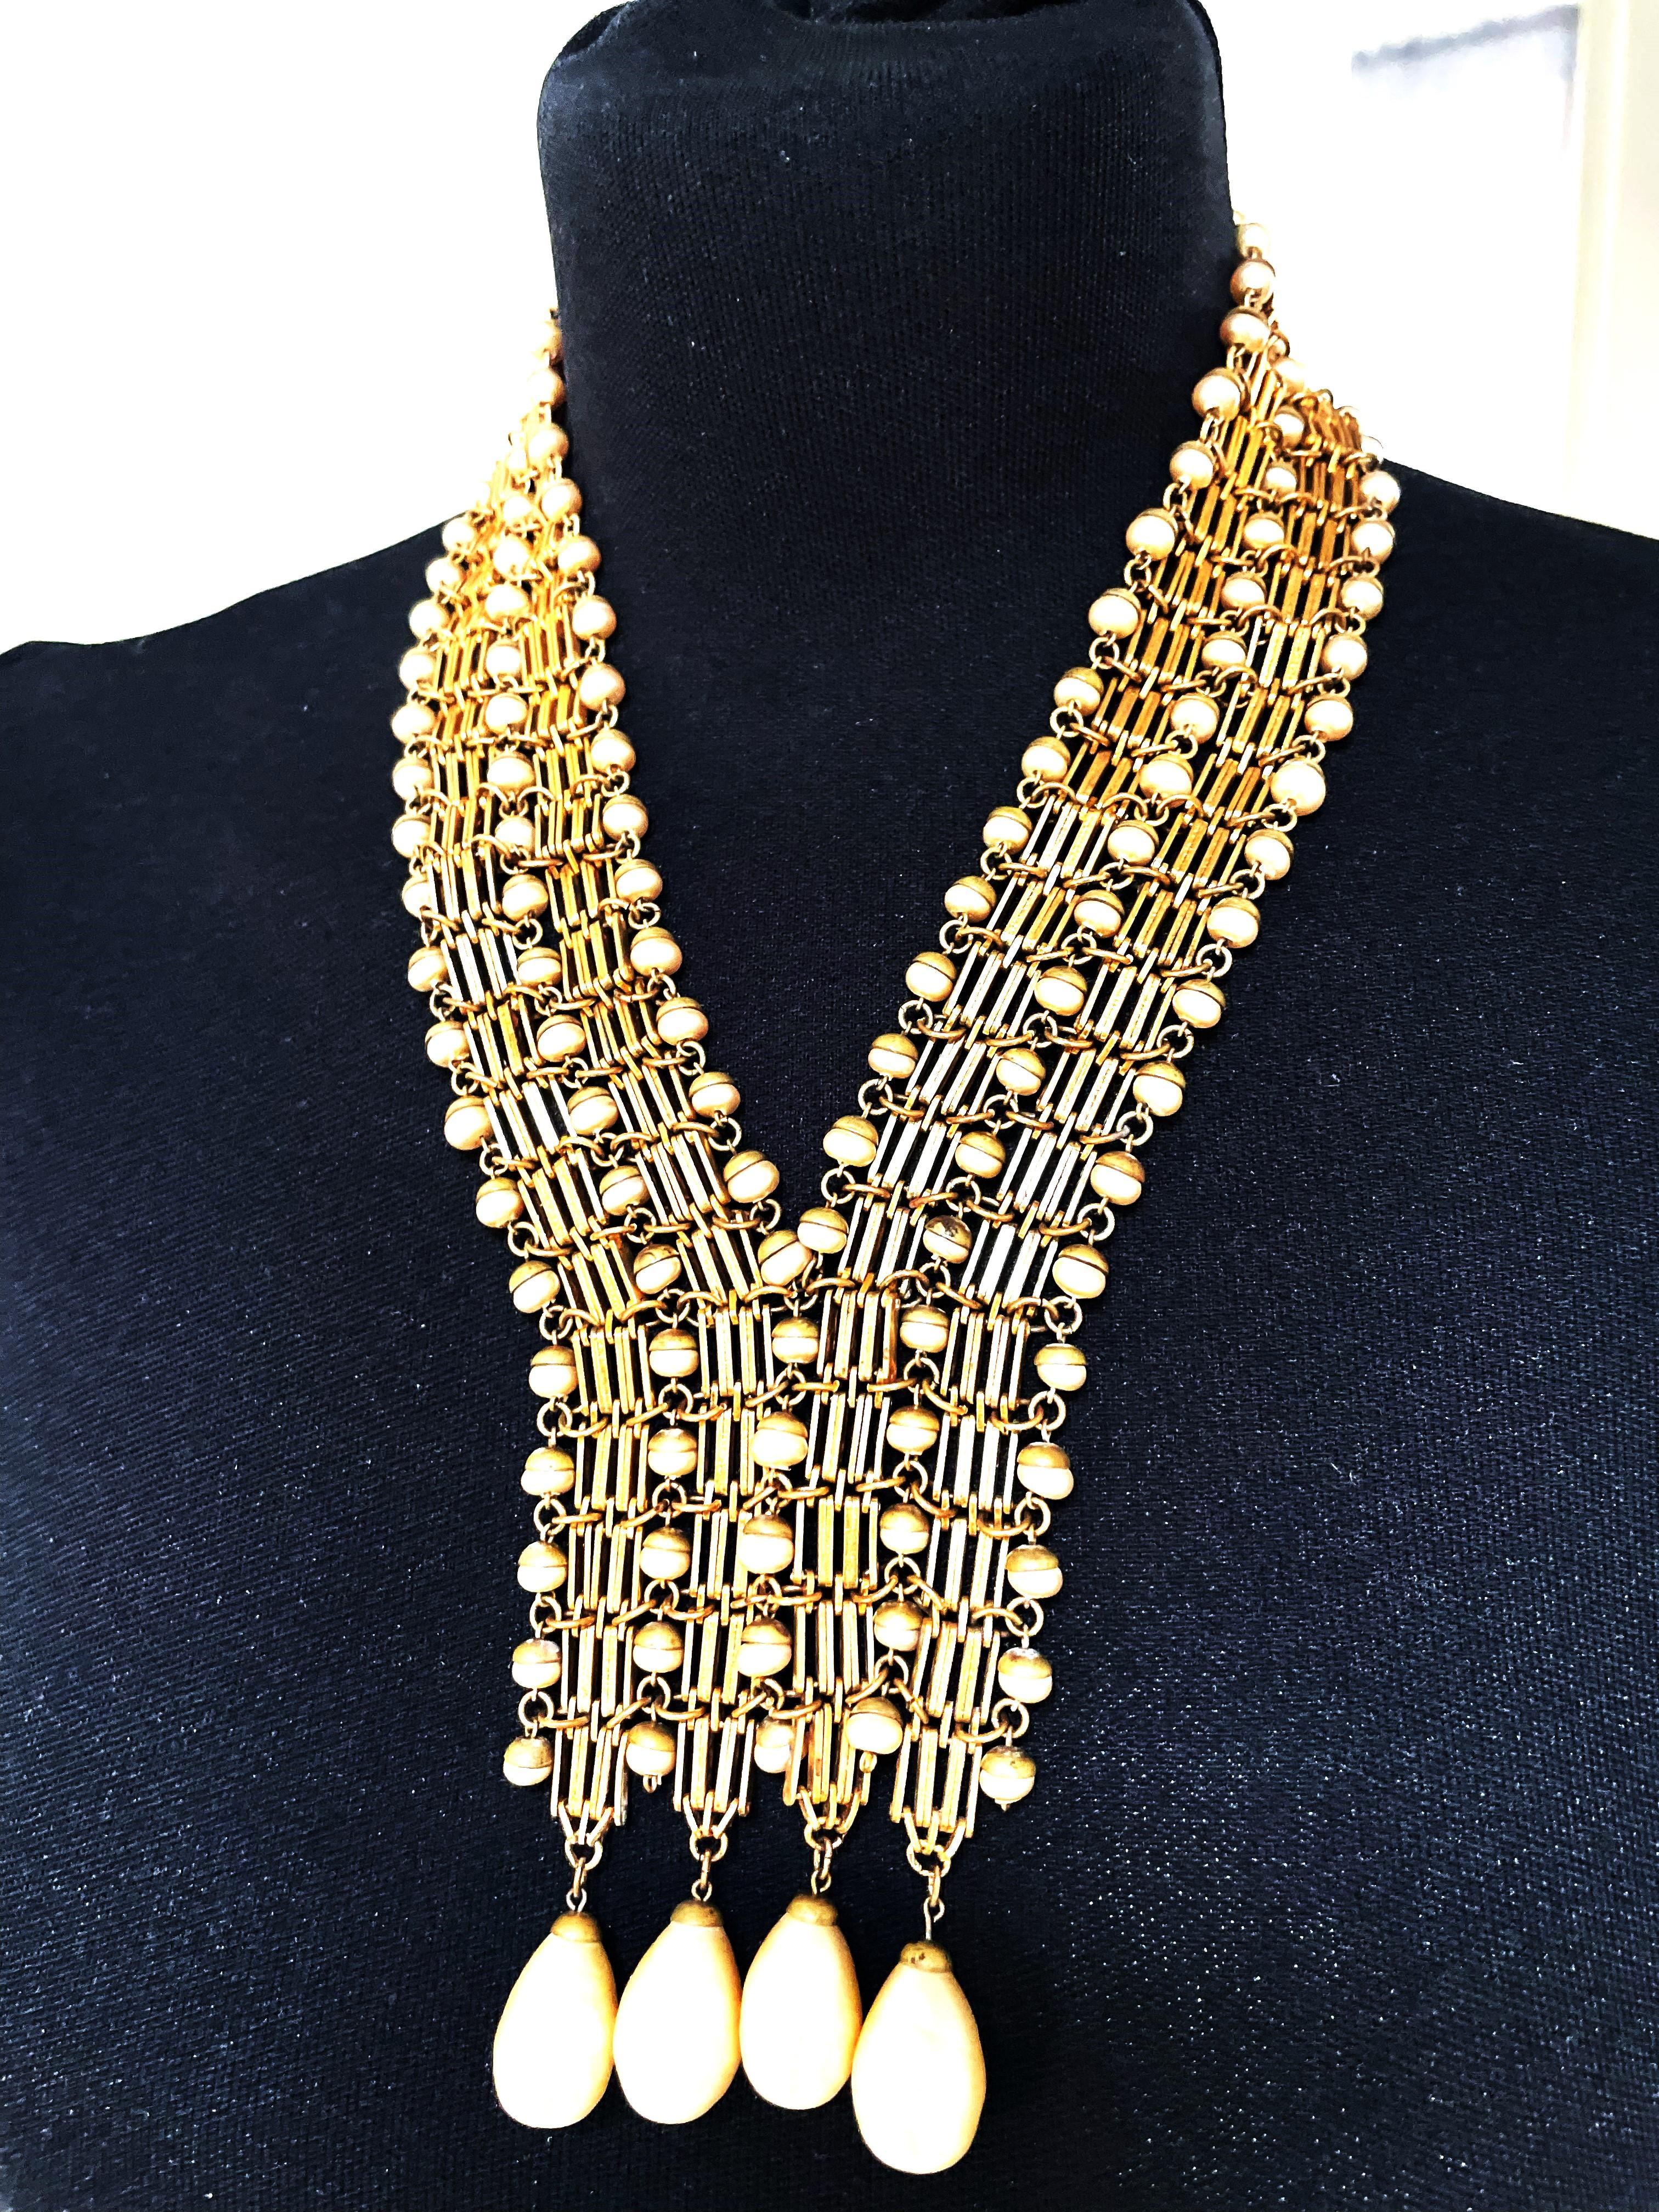  V-SHAPED NECKLACE, early 1940's, gold plated, handmade pearls, Made in France  For Sale 1